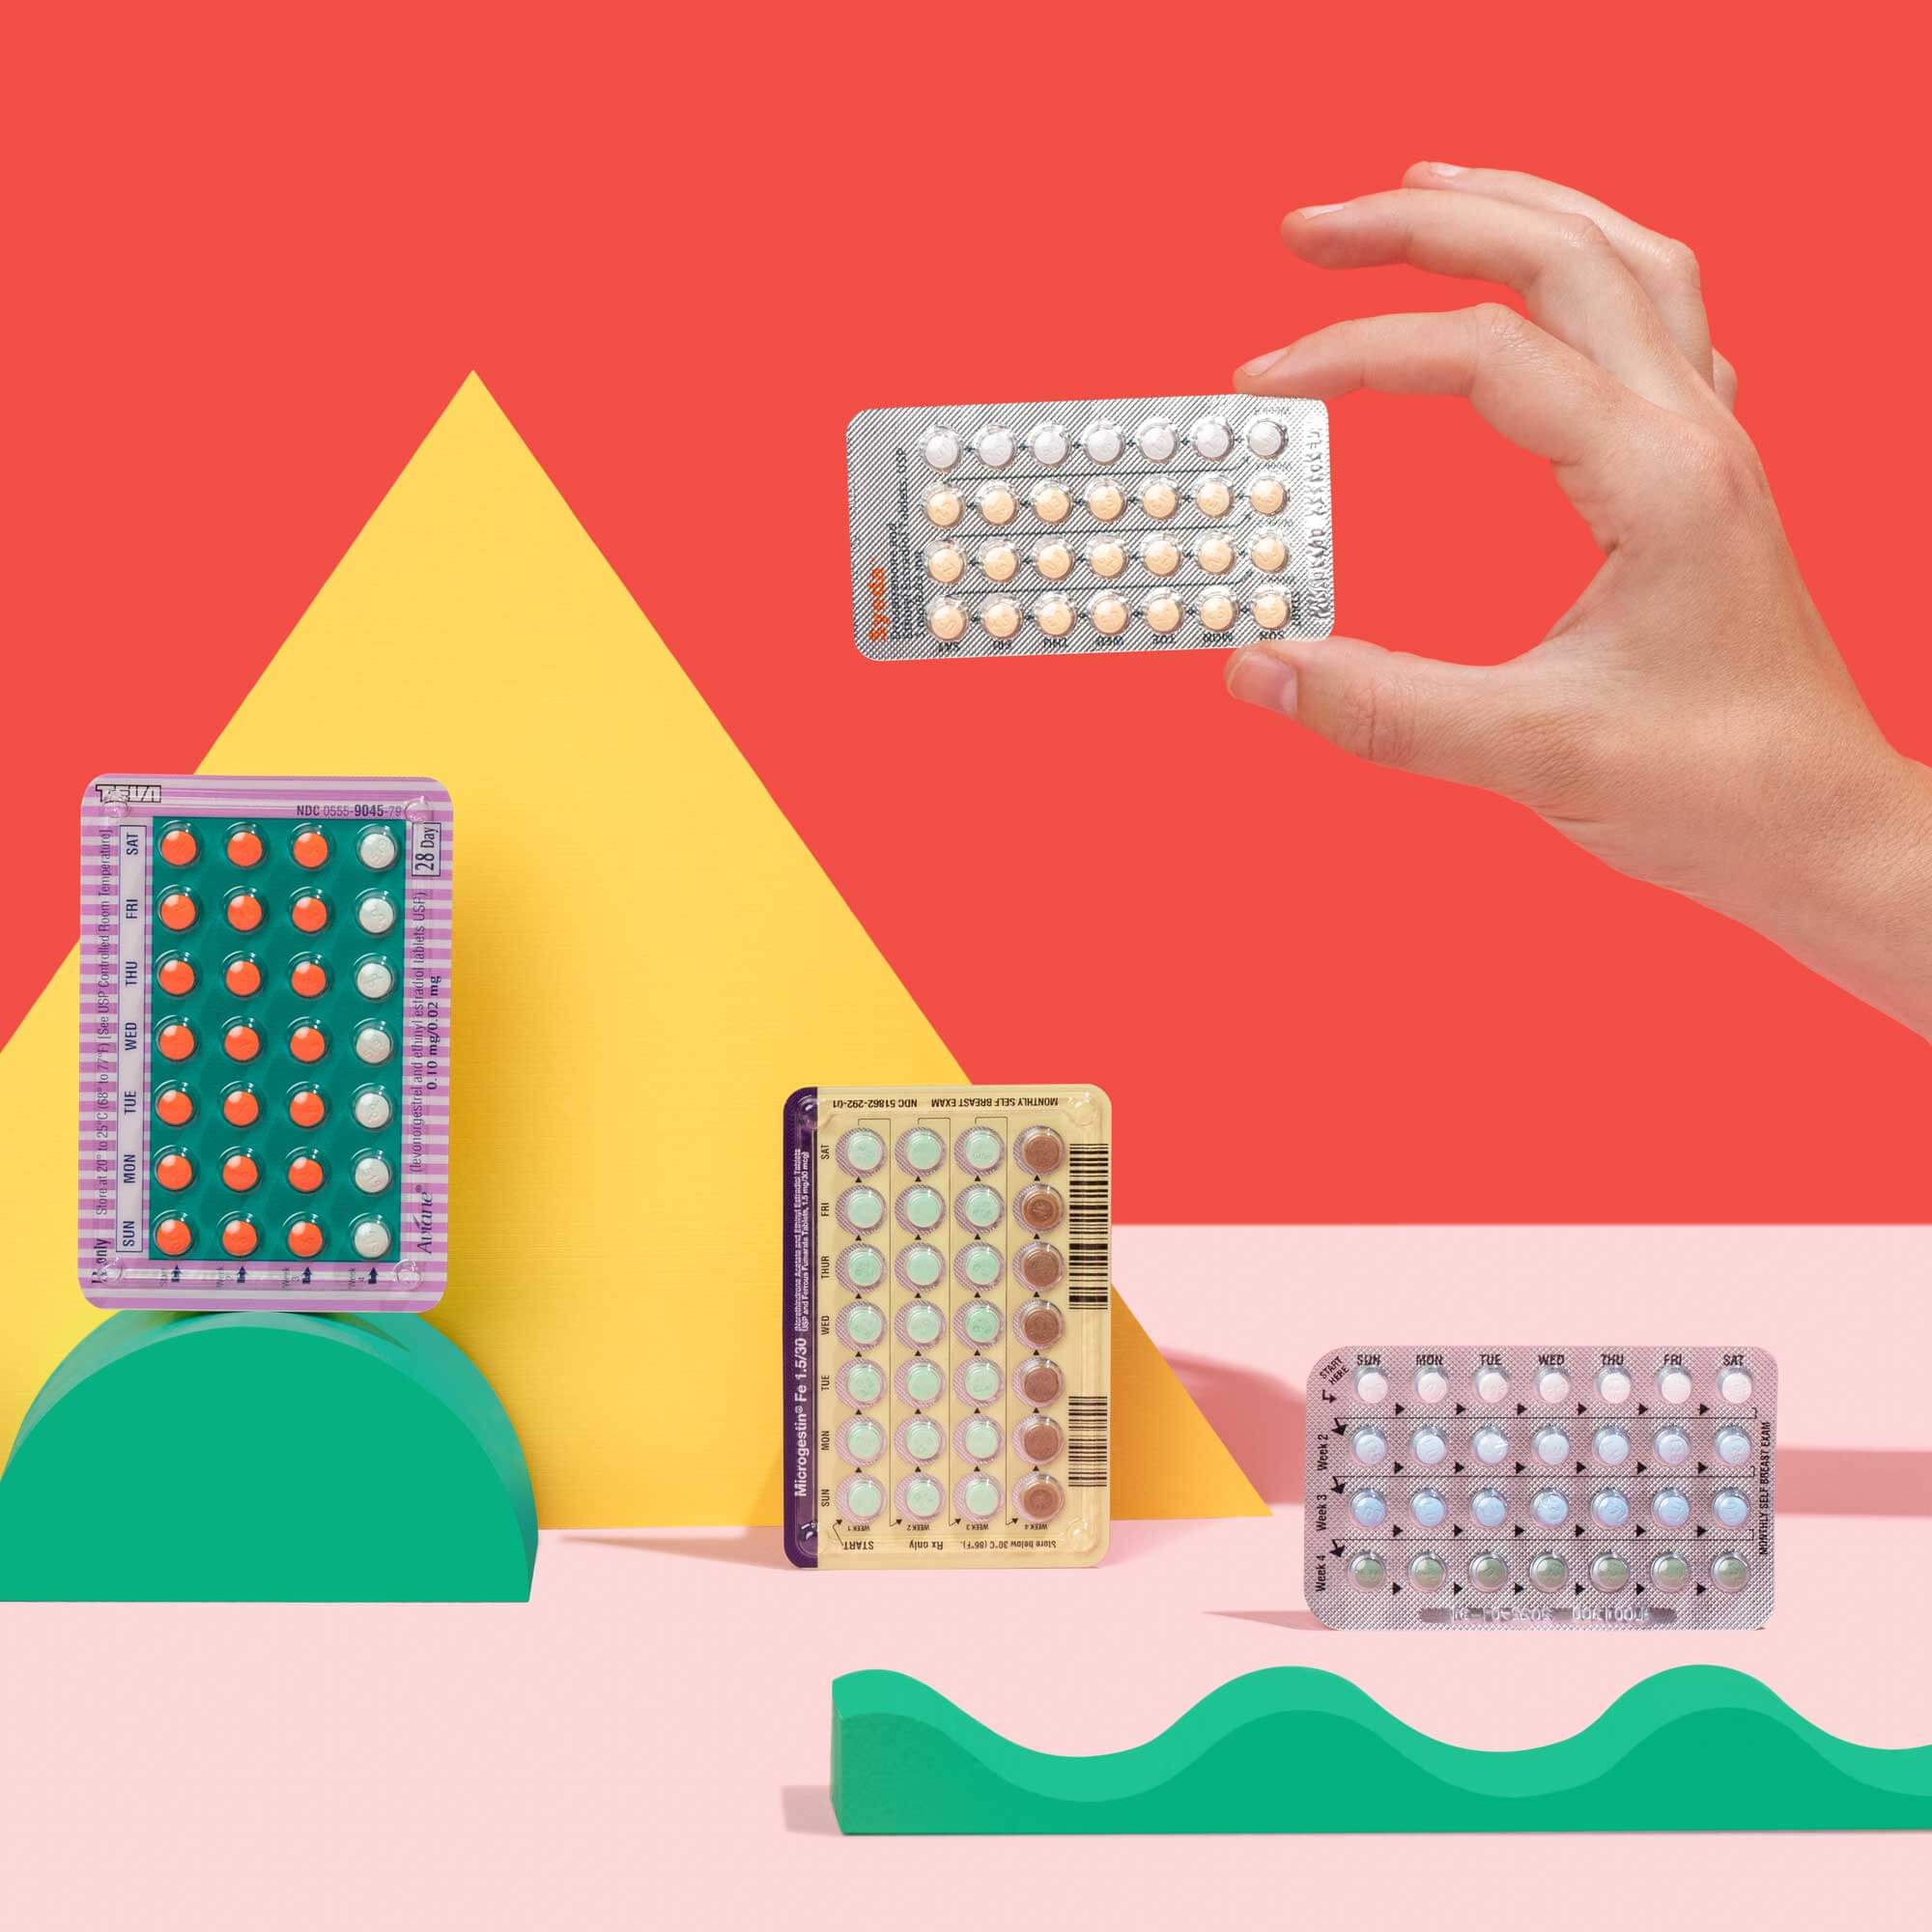 Person holding birth control packets with colorful background and geometric shapes